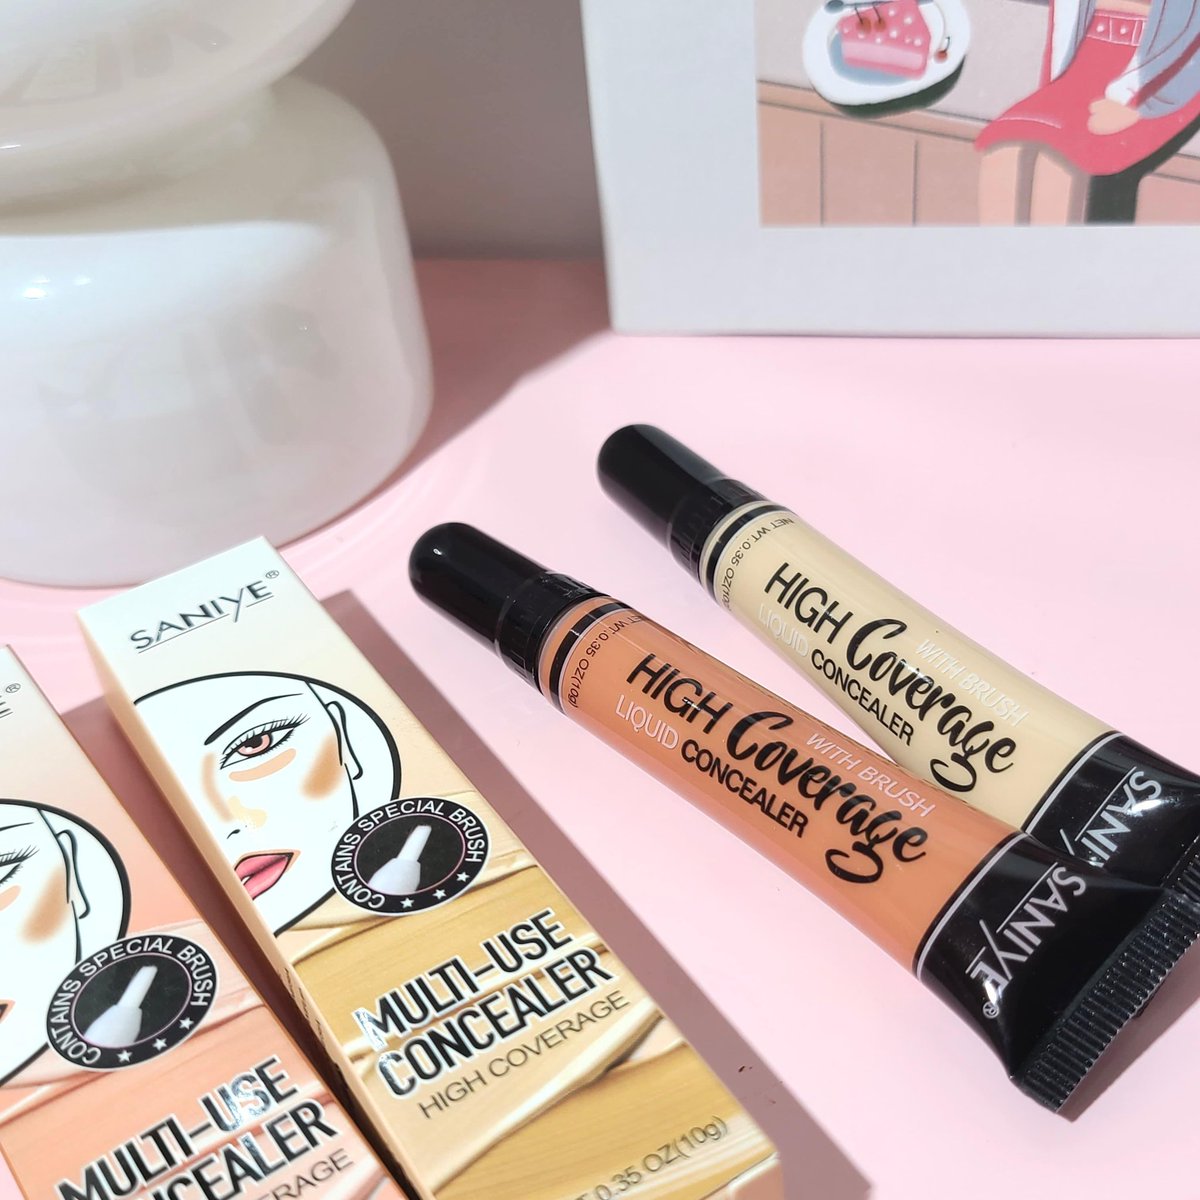 Achieve a flawless look with these easy makeup hacks! Use a corrector to neutralize blemishes and a concealer to cover imperfections😍💭

#SaniyeCosmetics #BeautyFromWithin #BeautyWithSaniye